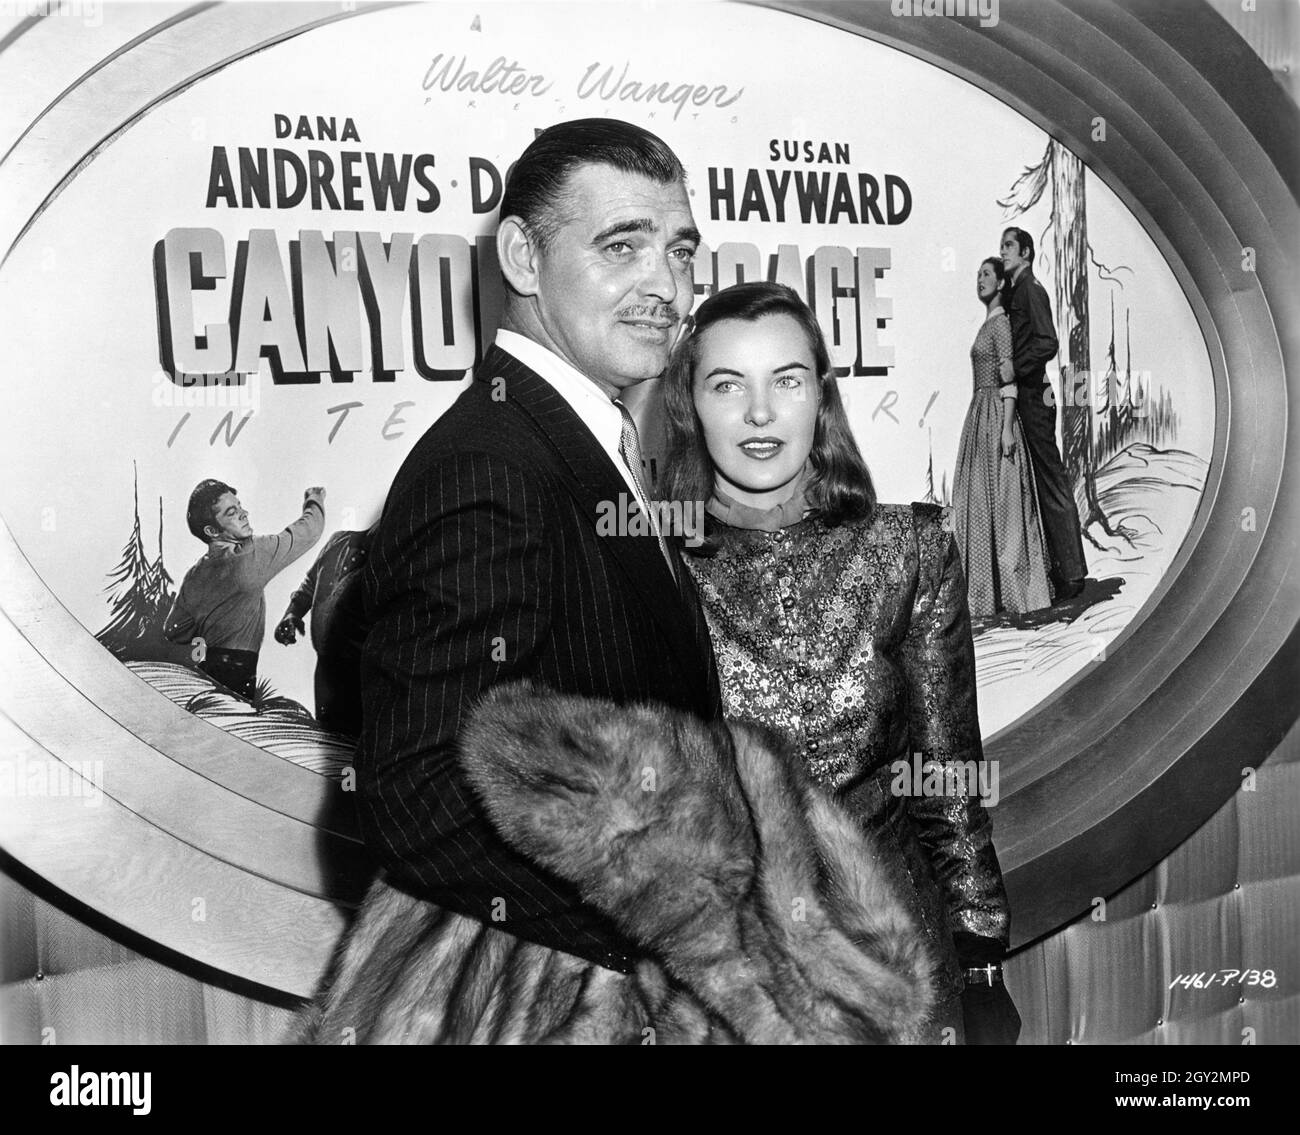 CLARK GABLE and ELLA RAINES attending the Hollywood Premiere in July 1946 of Dana Andrews Dan Duryea and Susan Hayward in CANYON PASSAGE 1945 director Jacques Tourneur producer Walter Wanger publicity for Universal Pictures Stock Photo